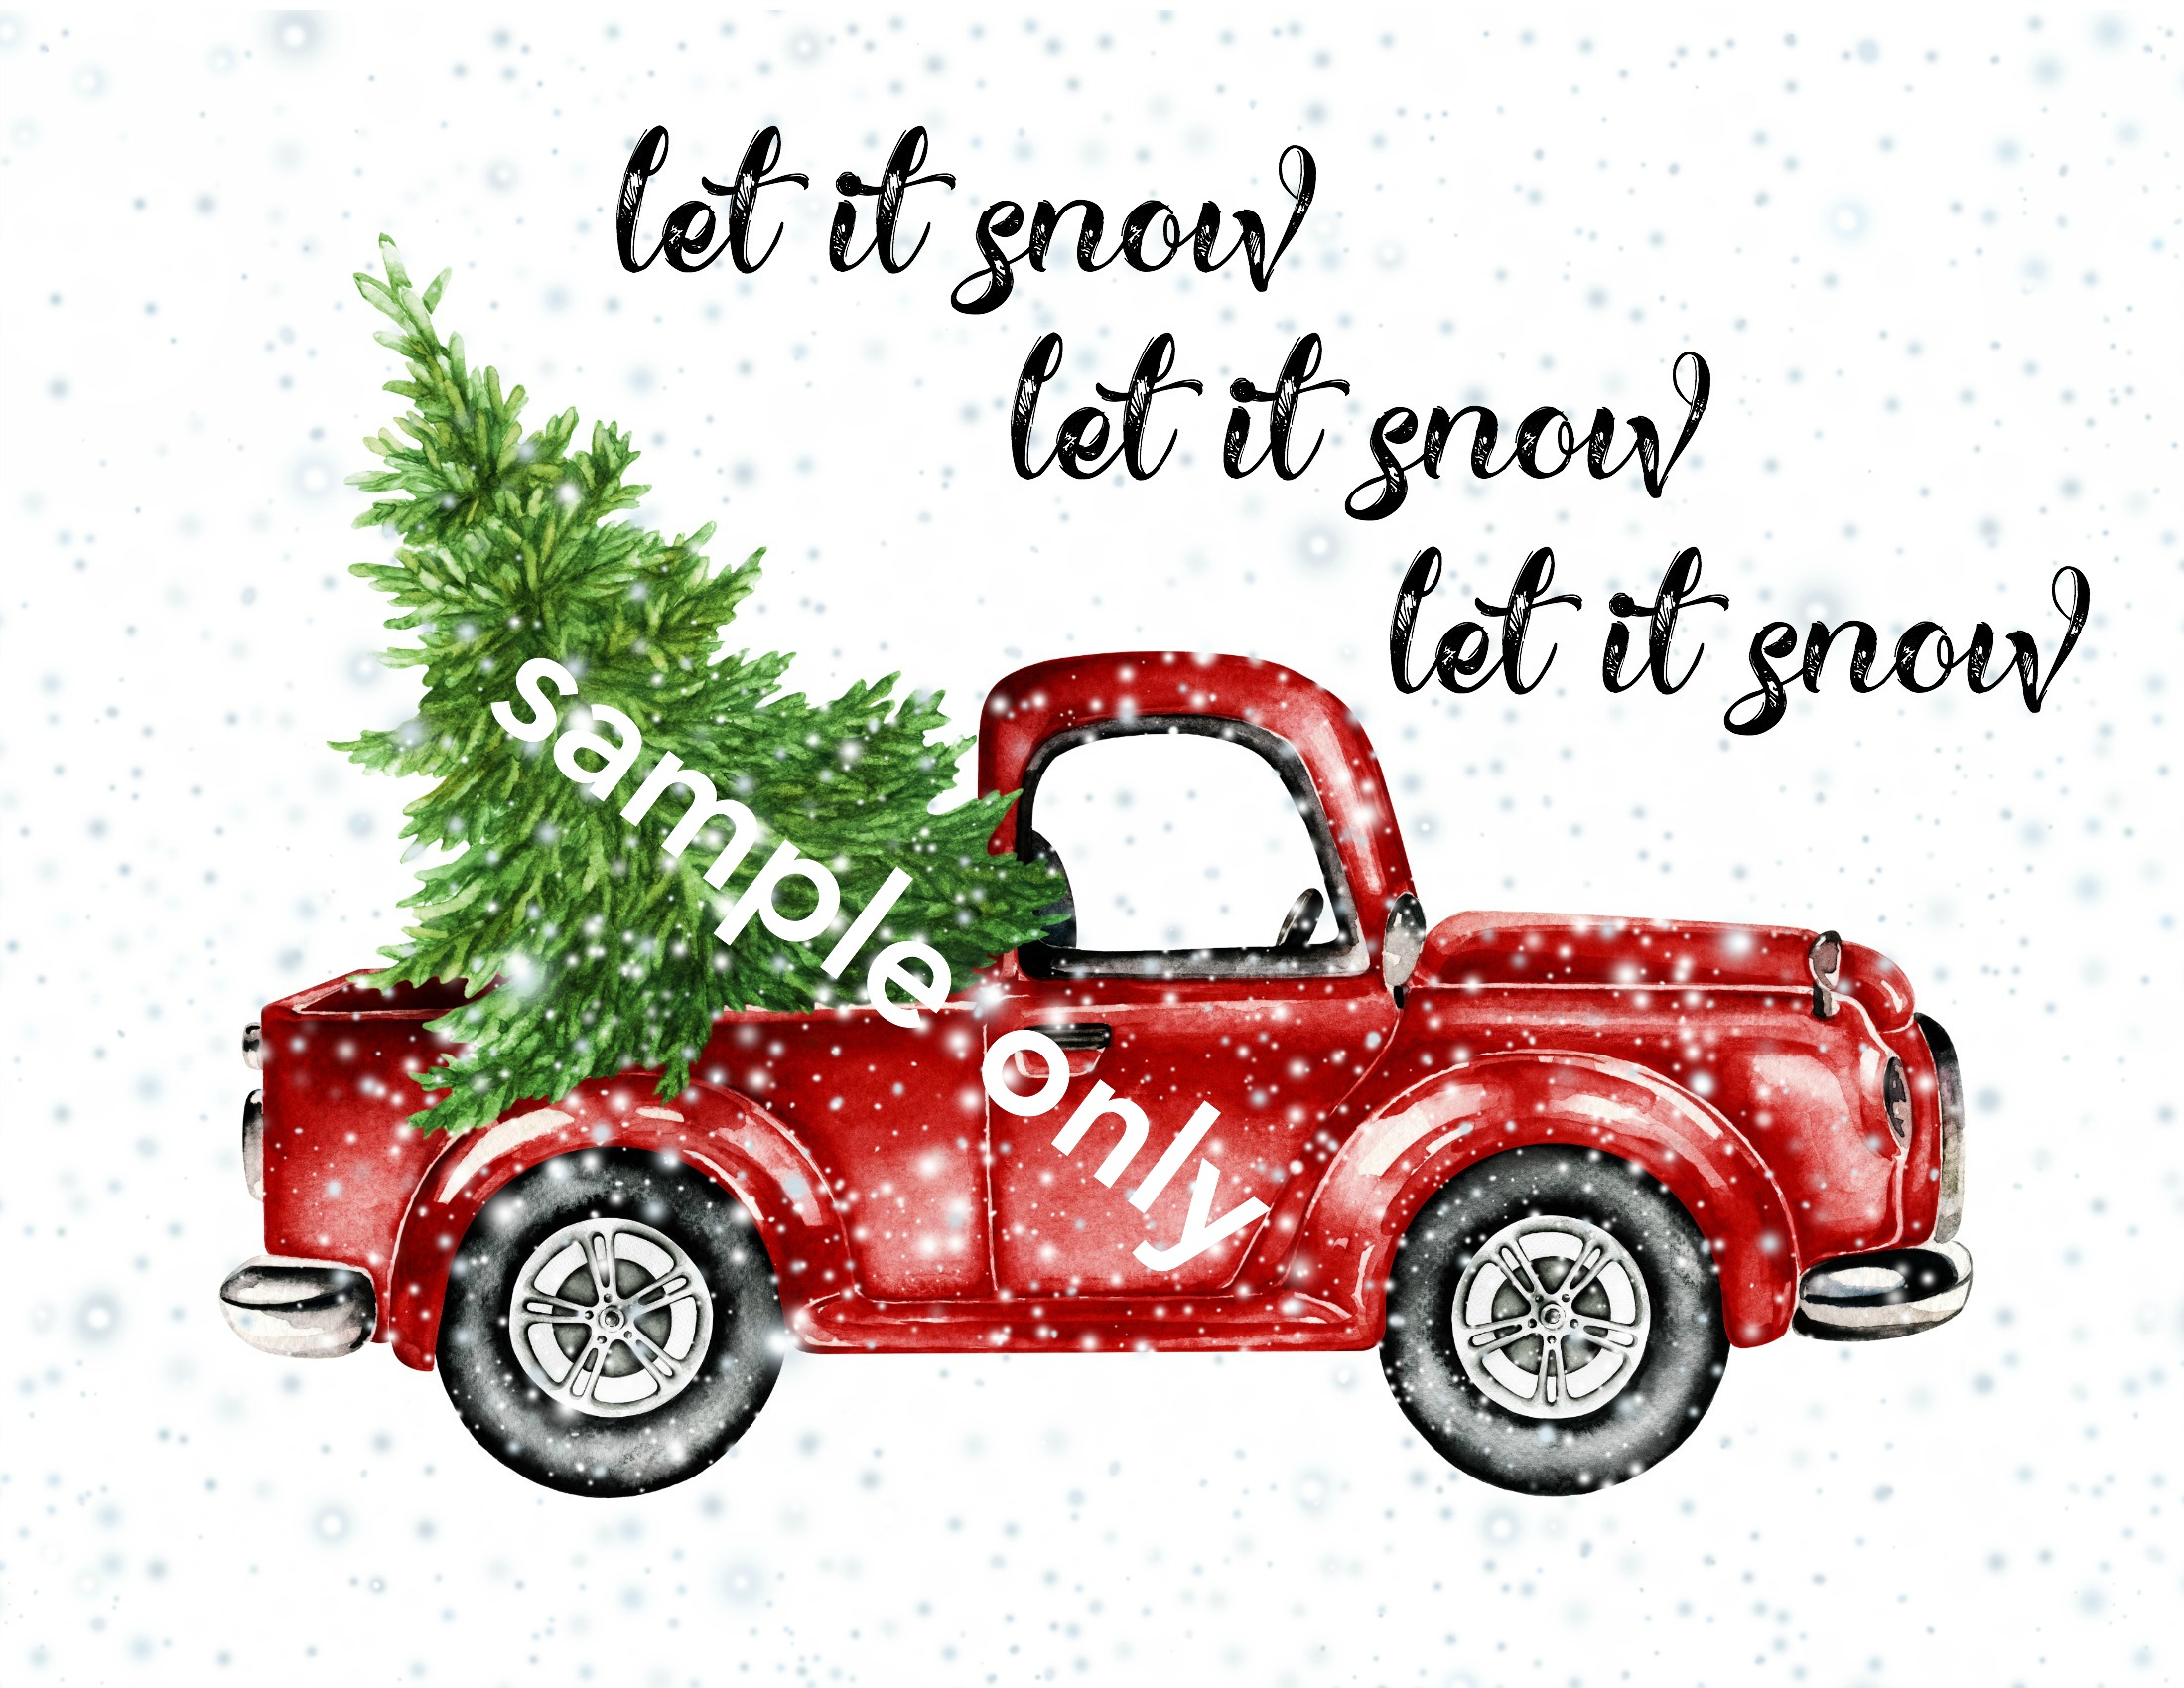 The printable with a red truck and the words let it snow on it.